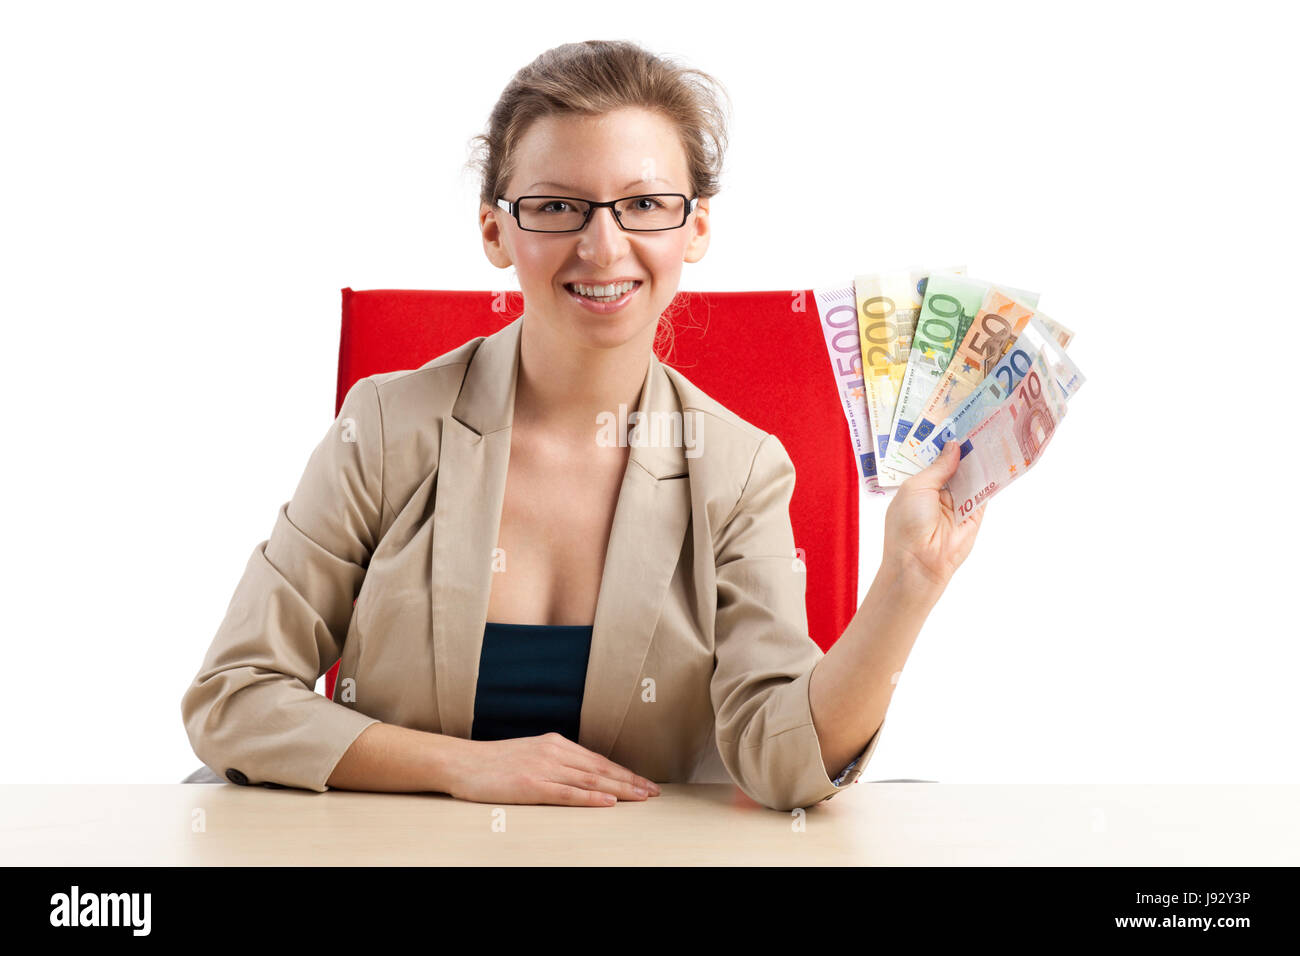 woman showing happy a fan of euro notes Stock Photo